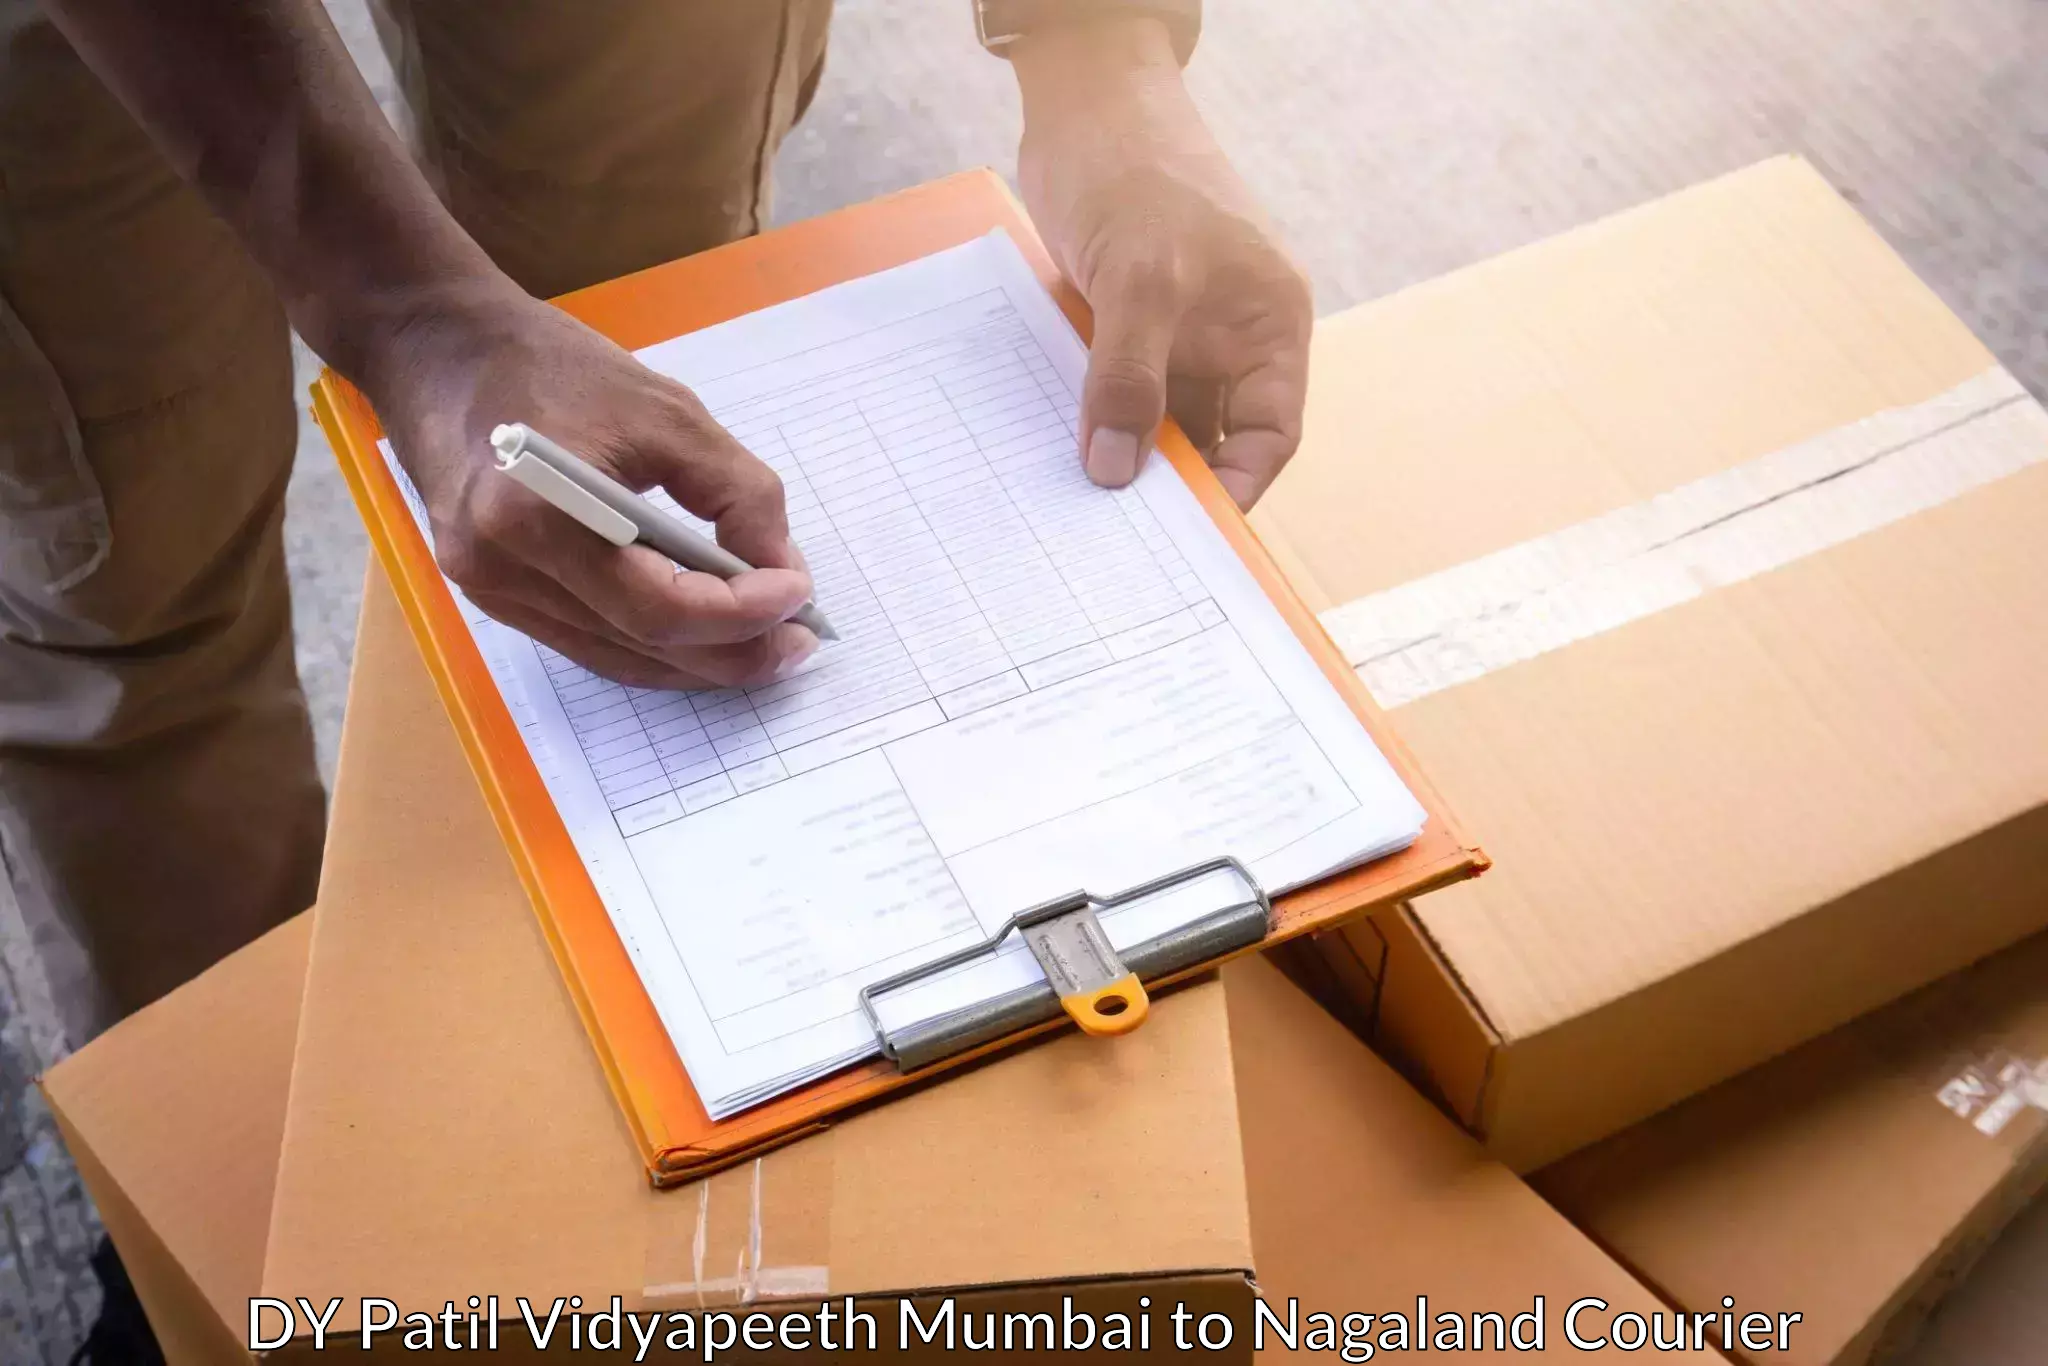 End-to-end delivery DY Patil Vidyapeeth Mumbai to Mon